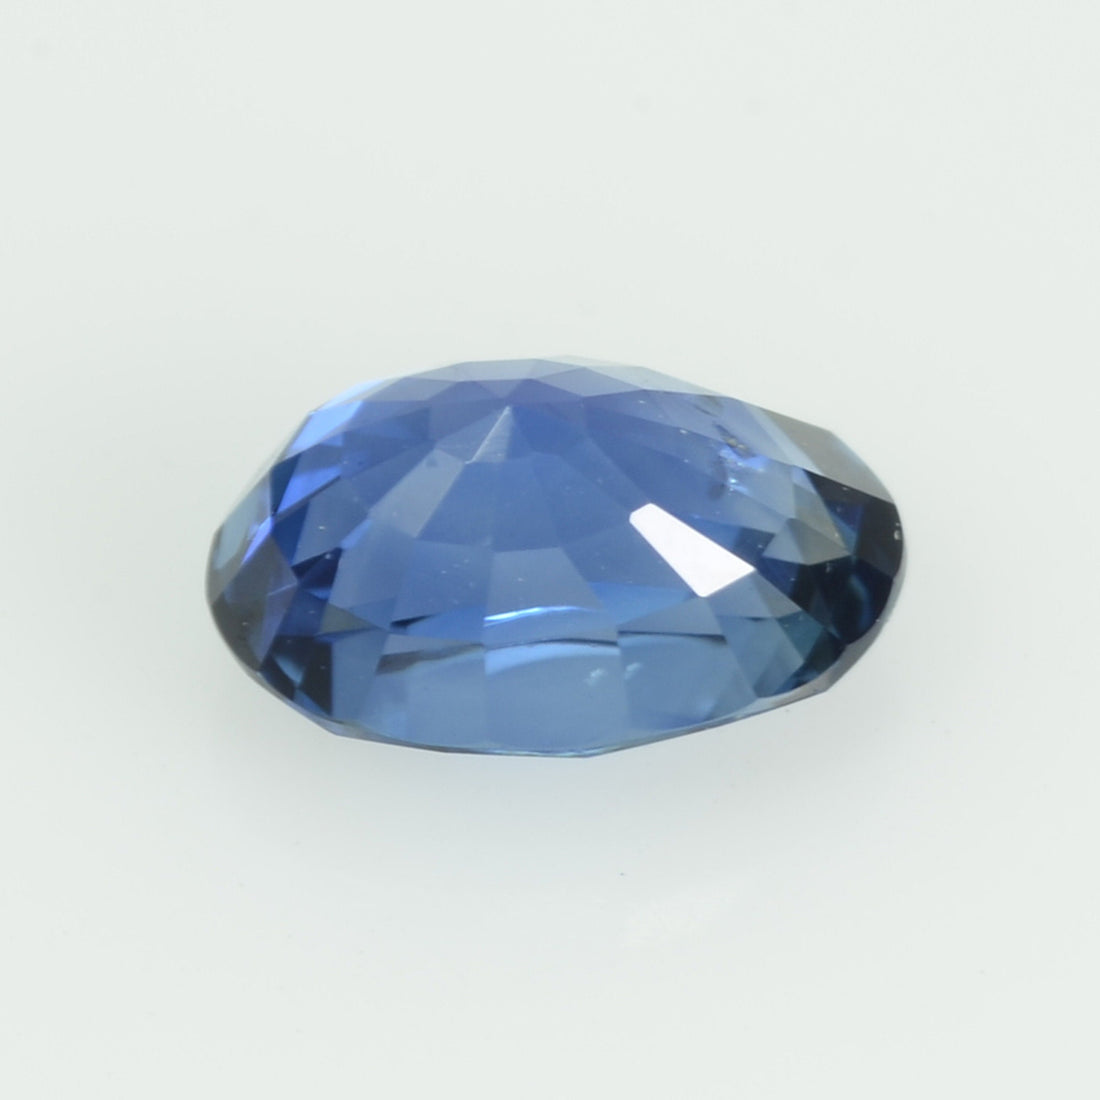 0.90 cts natural blue sapphire loose gemstone oval cut AGL Certified